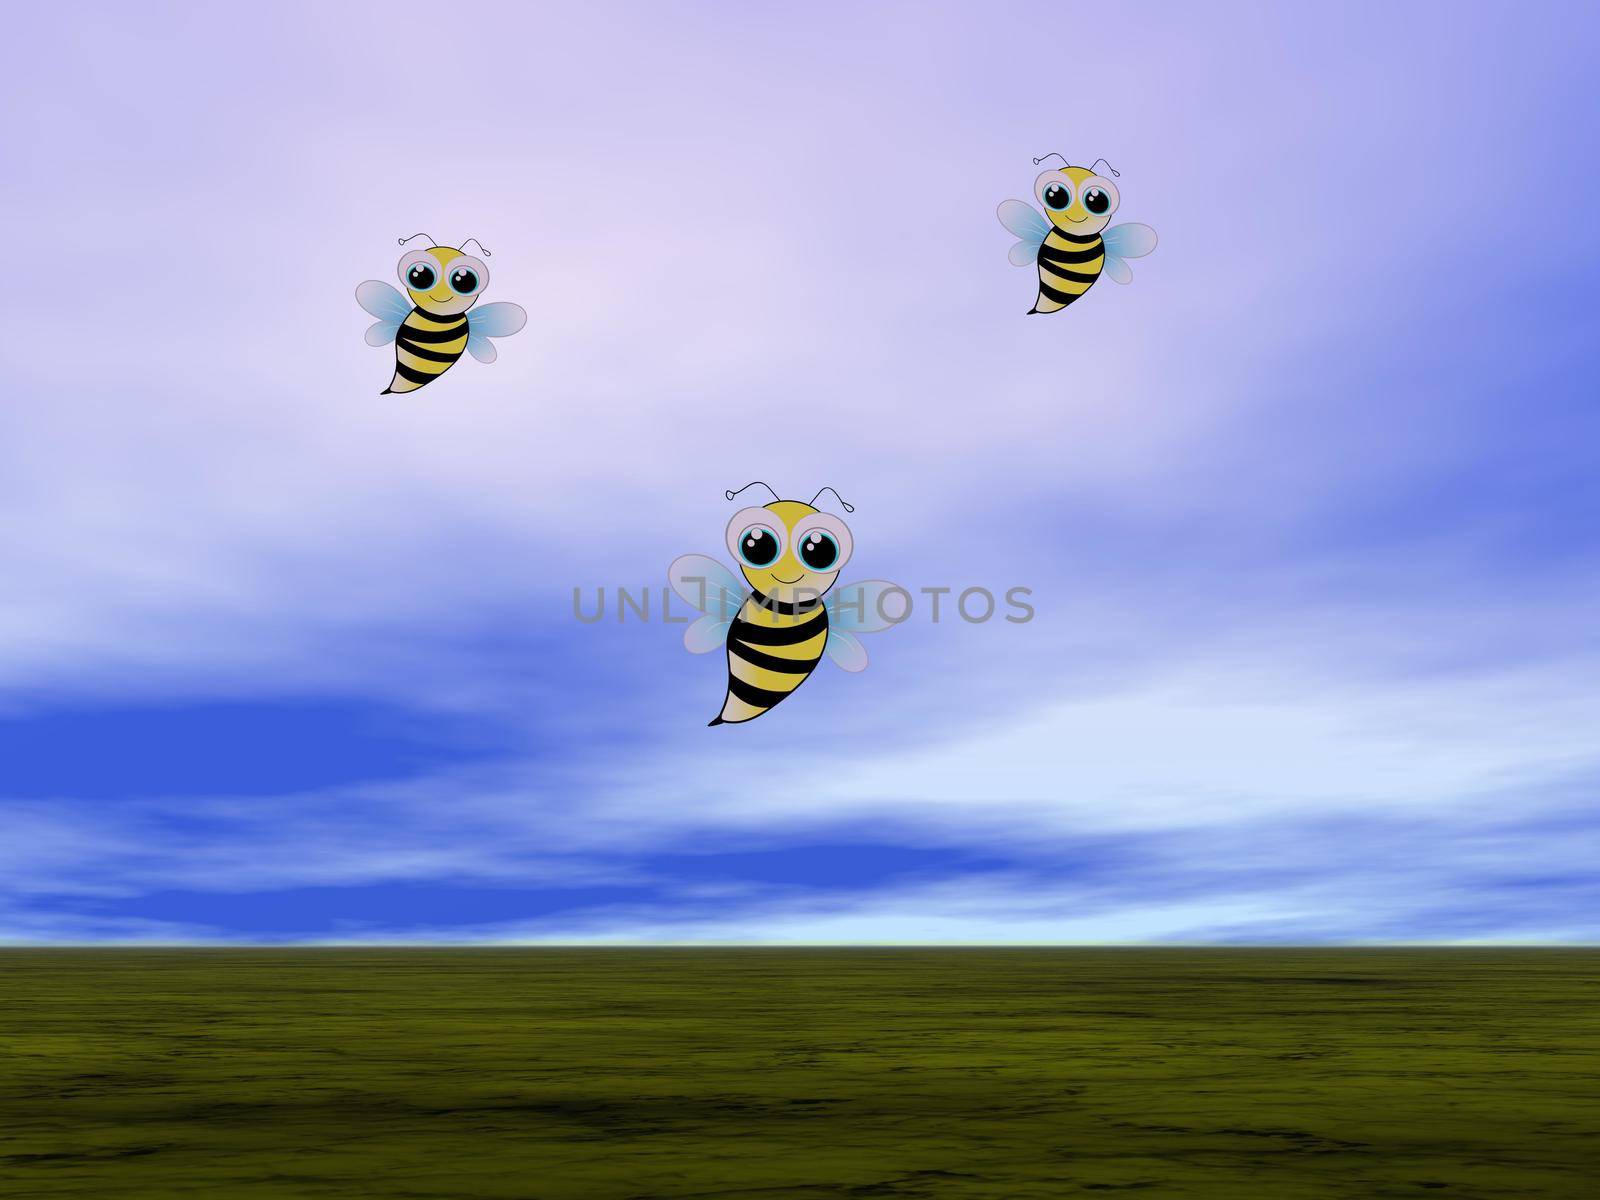 Save yellow bees on white background - 3d rendering